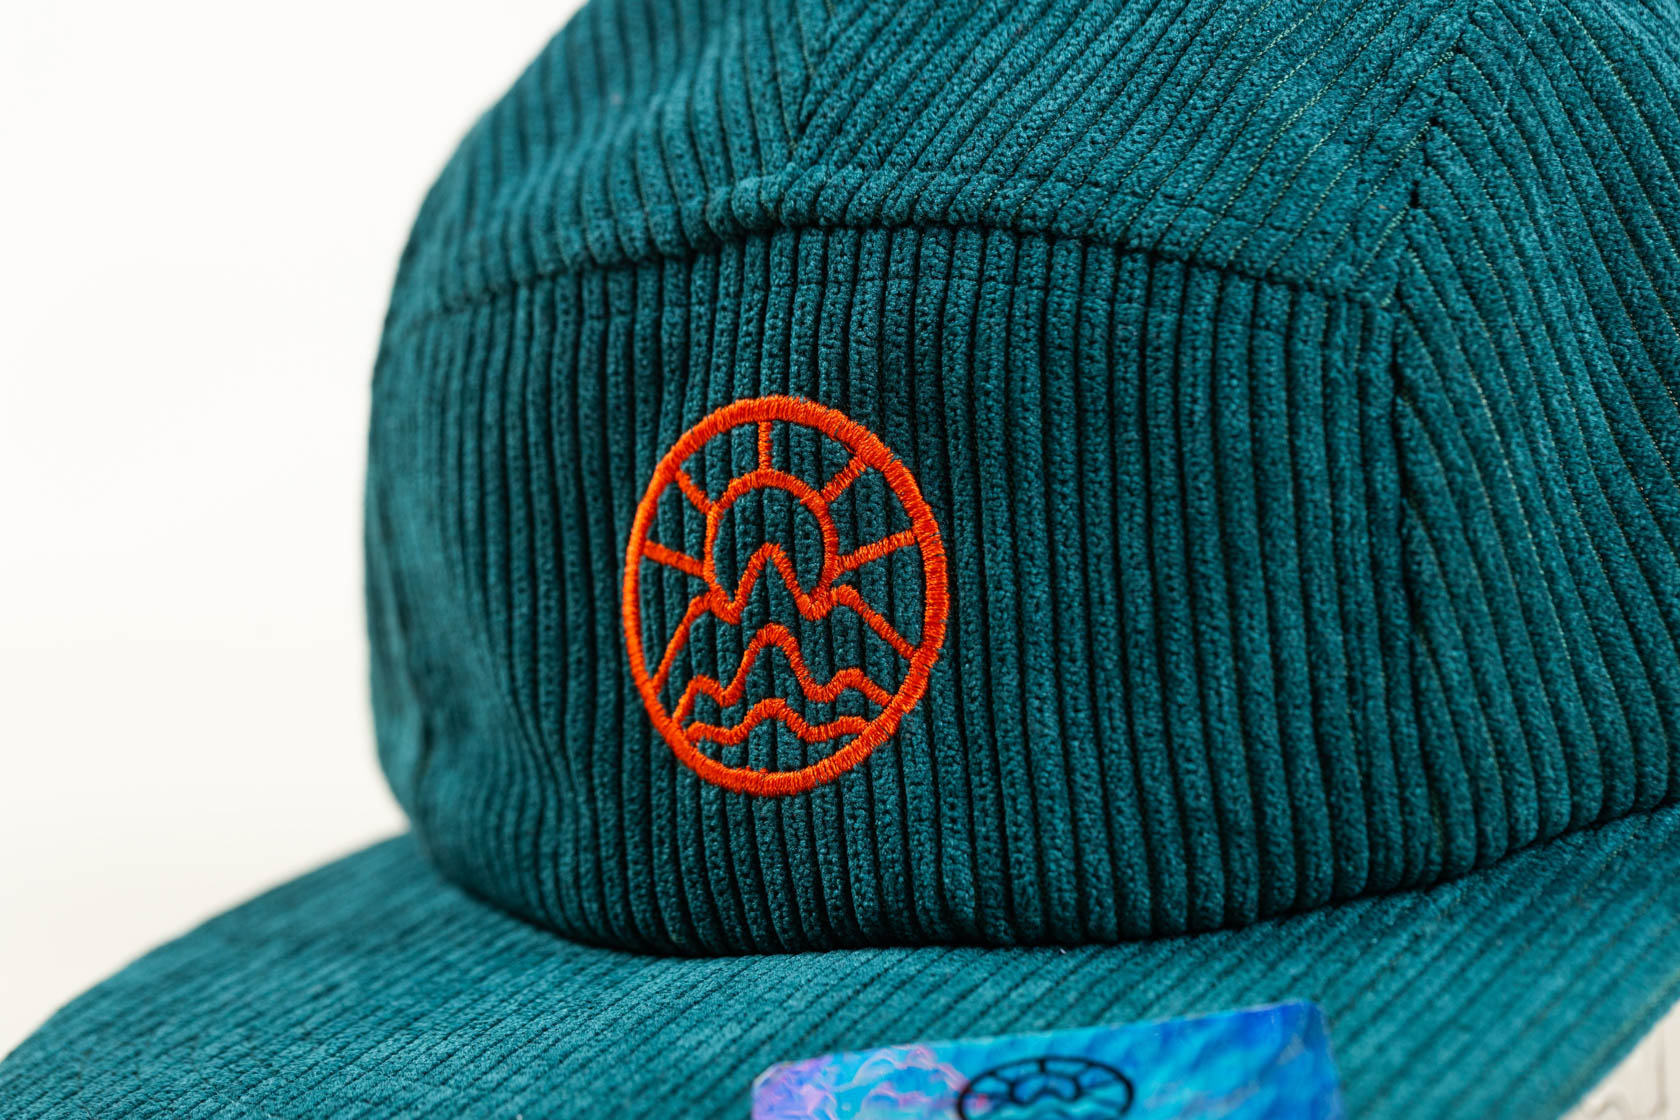 Orange McClumsy logo embroidered on a Rich Green Corduroy 5 Panel McClumsy Hat